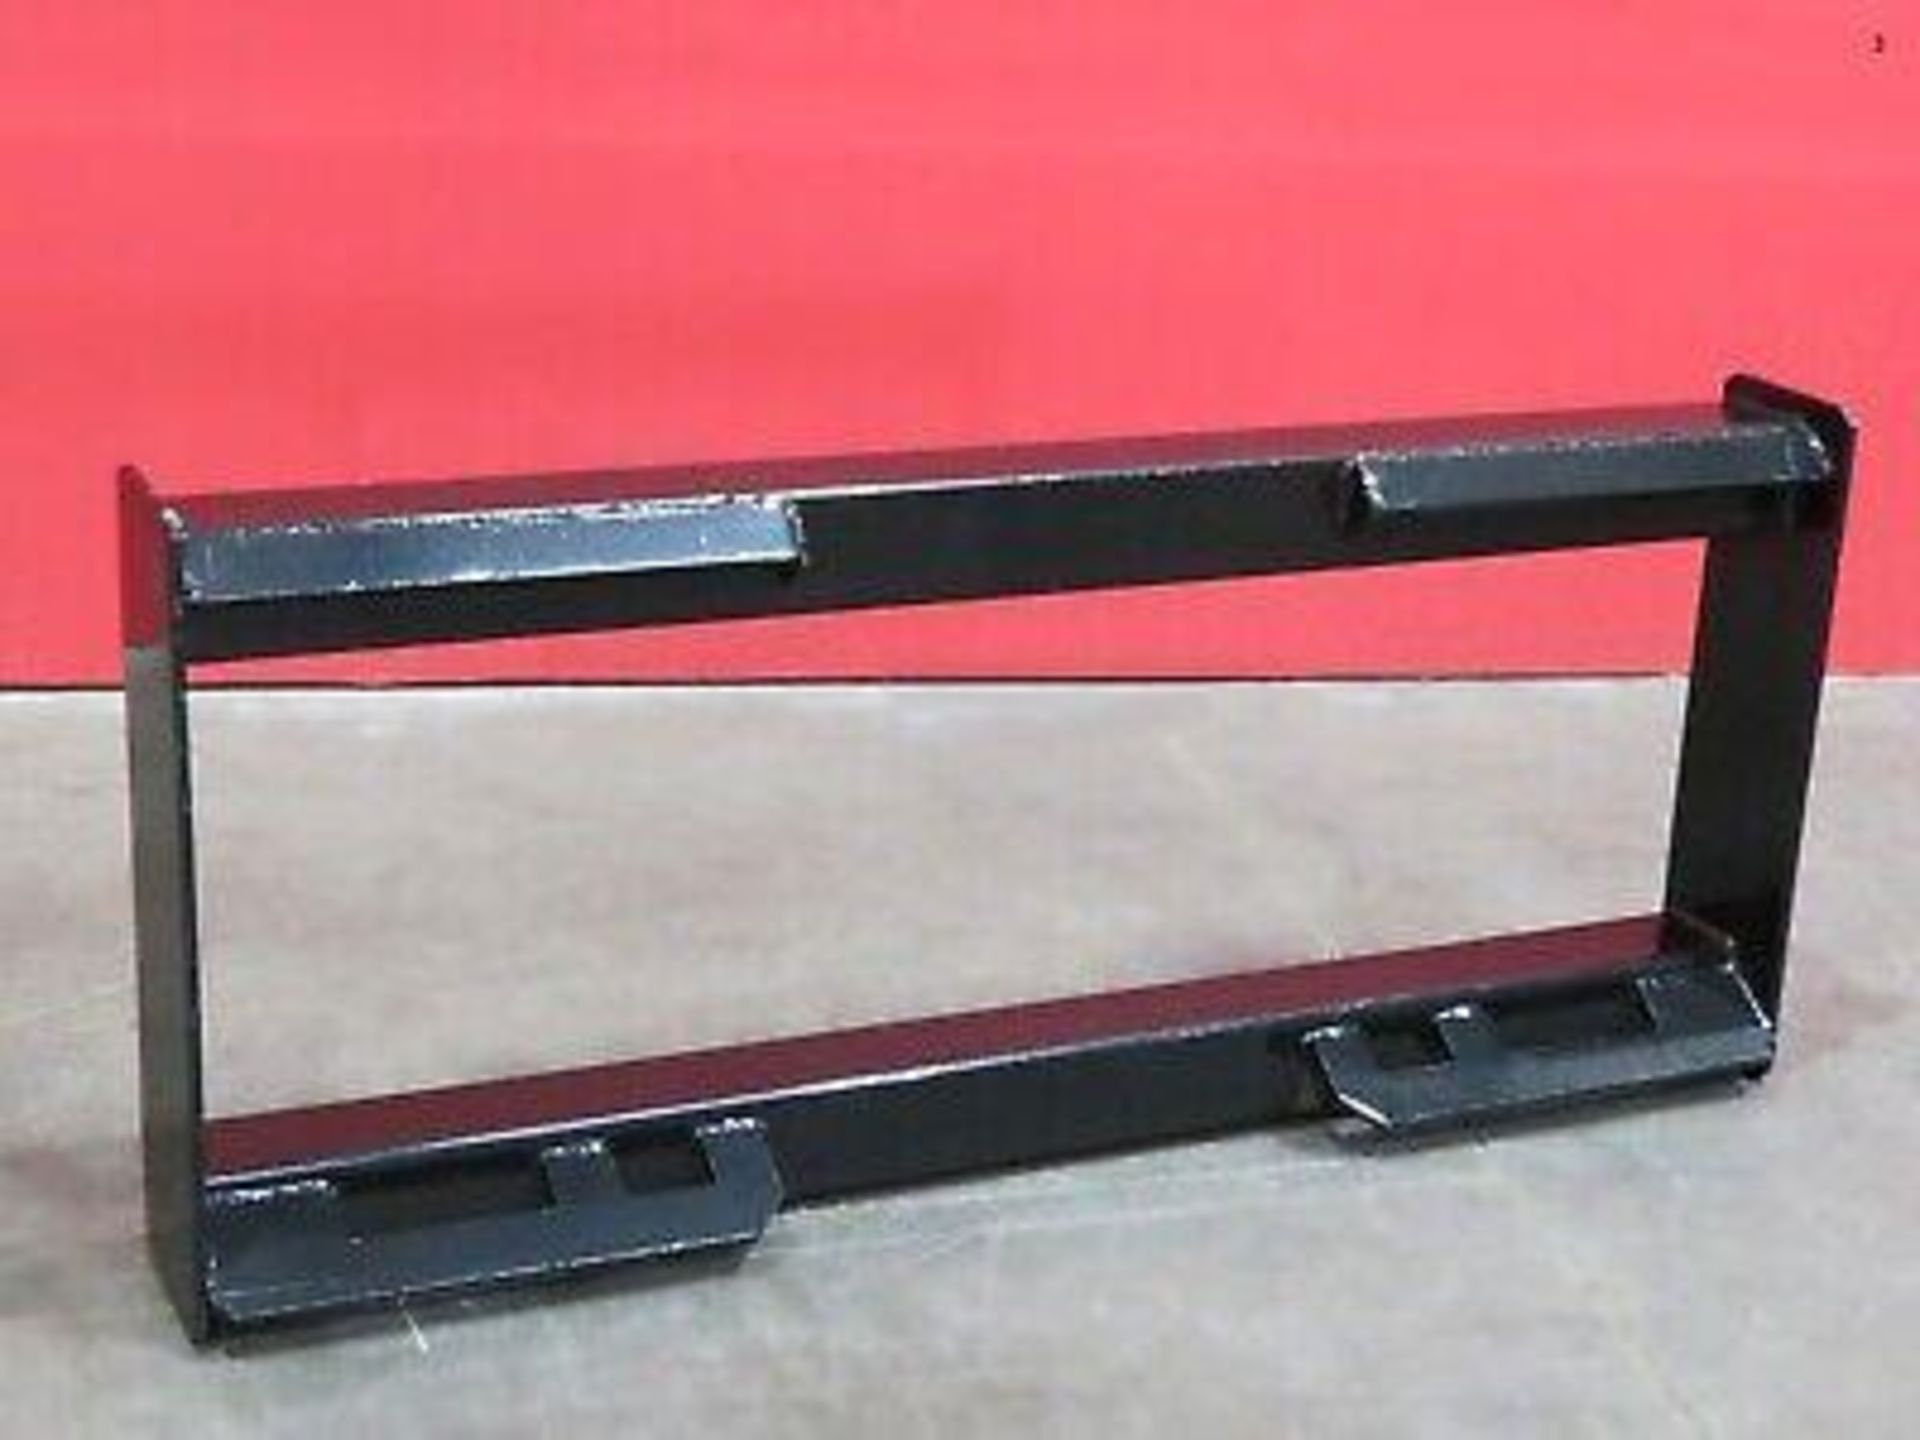 2022 UNIVERSAL MOUNTING FRAME SKID STEER ATTACHMENT BRAND/MODEL: MOWER KING SSMF QTY: 1